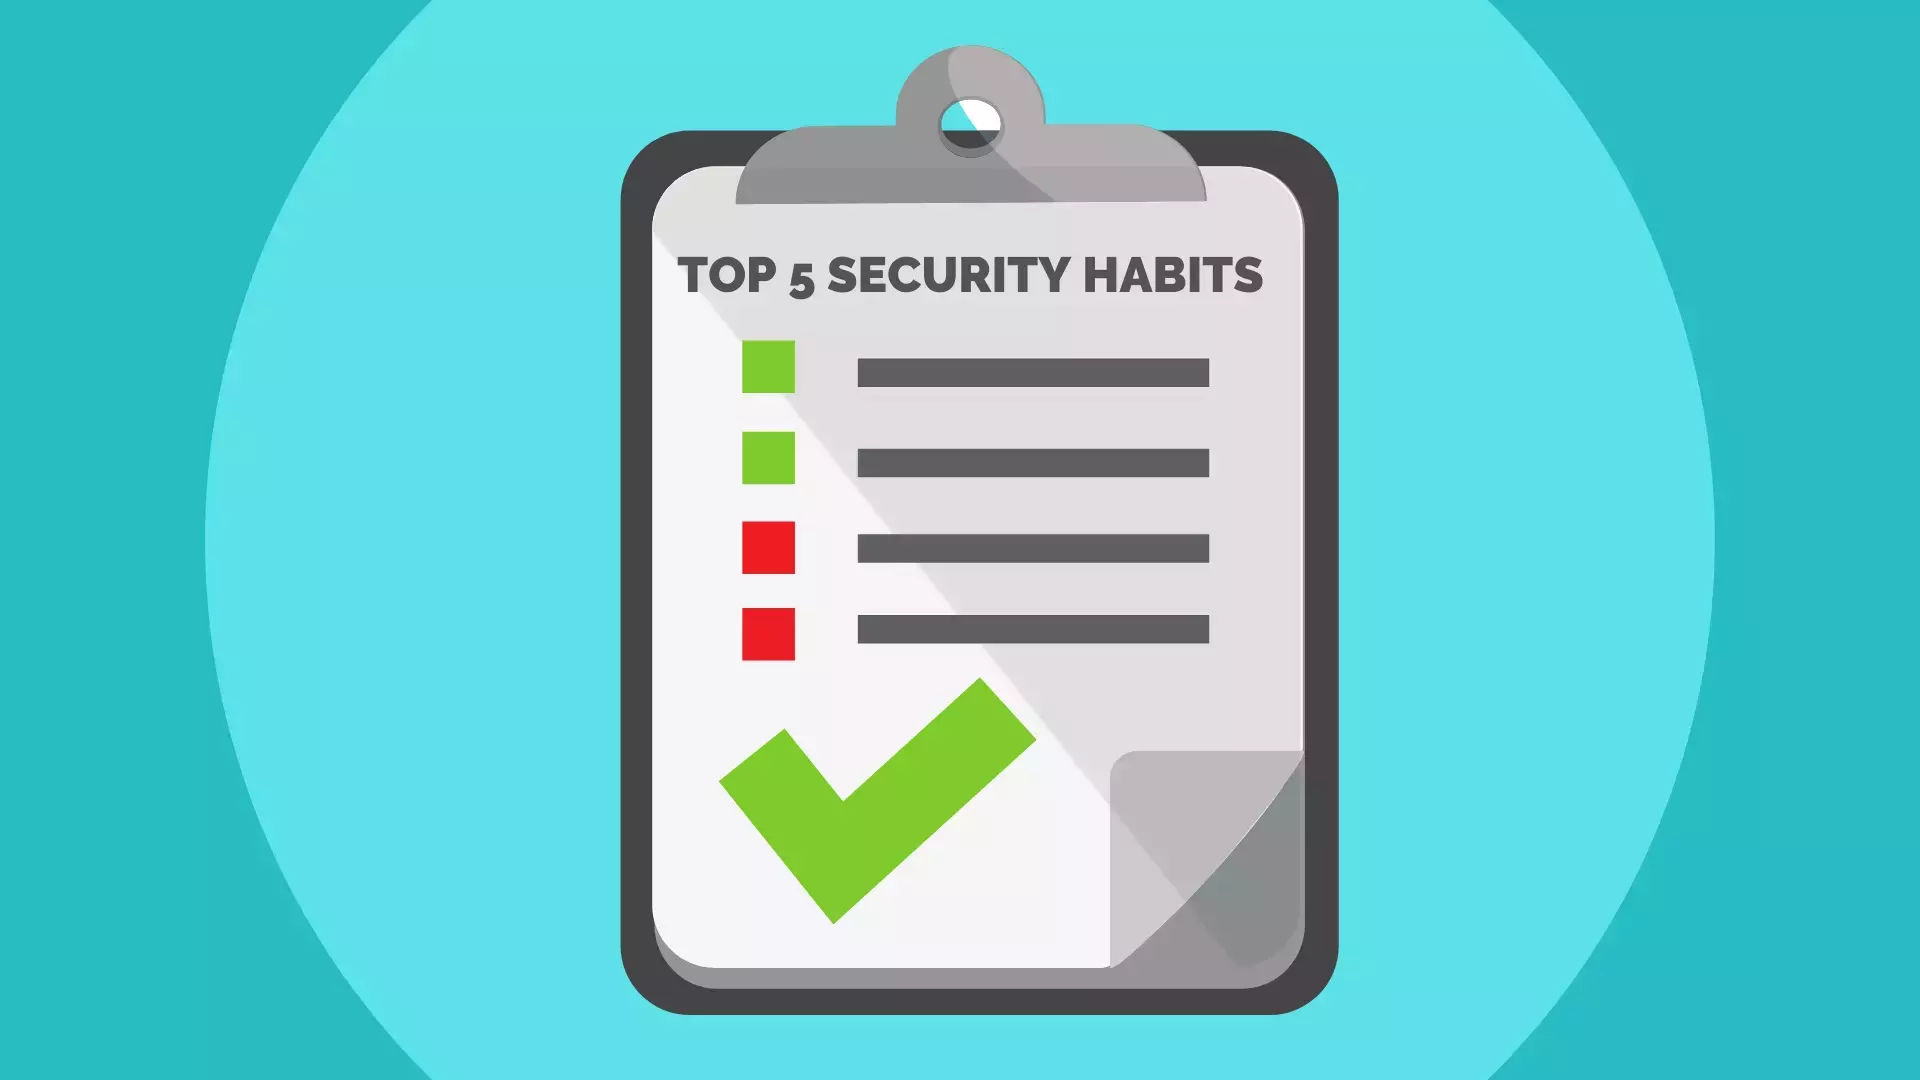 5 Good Security Habits for 2020